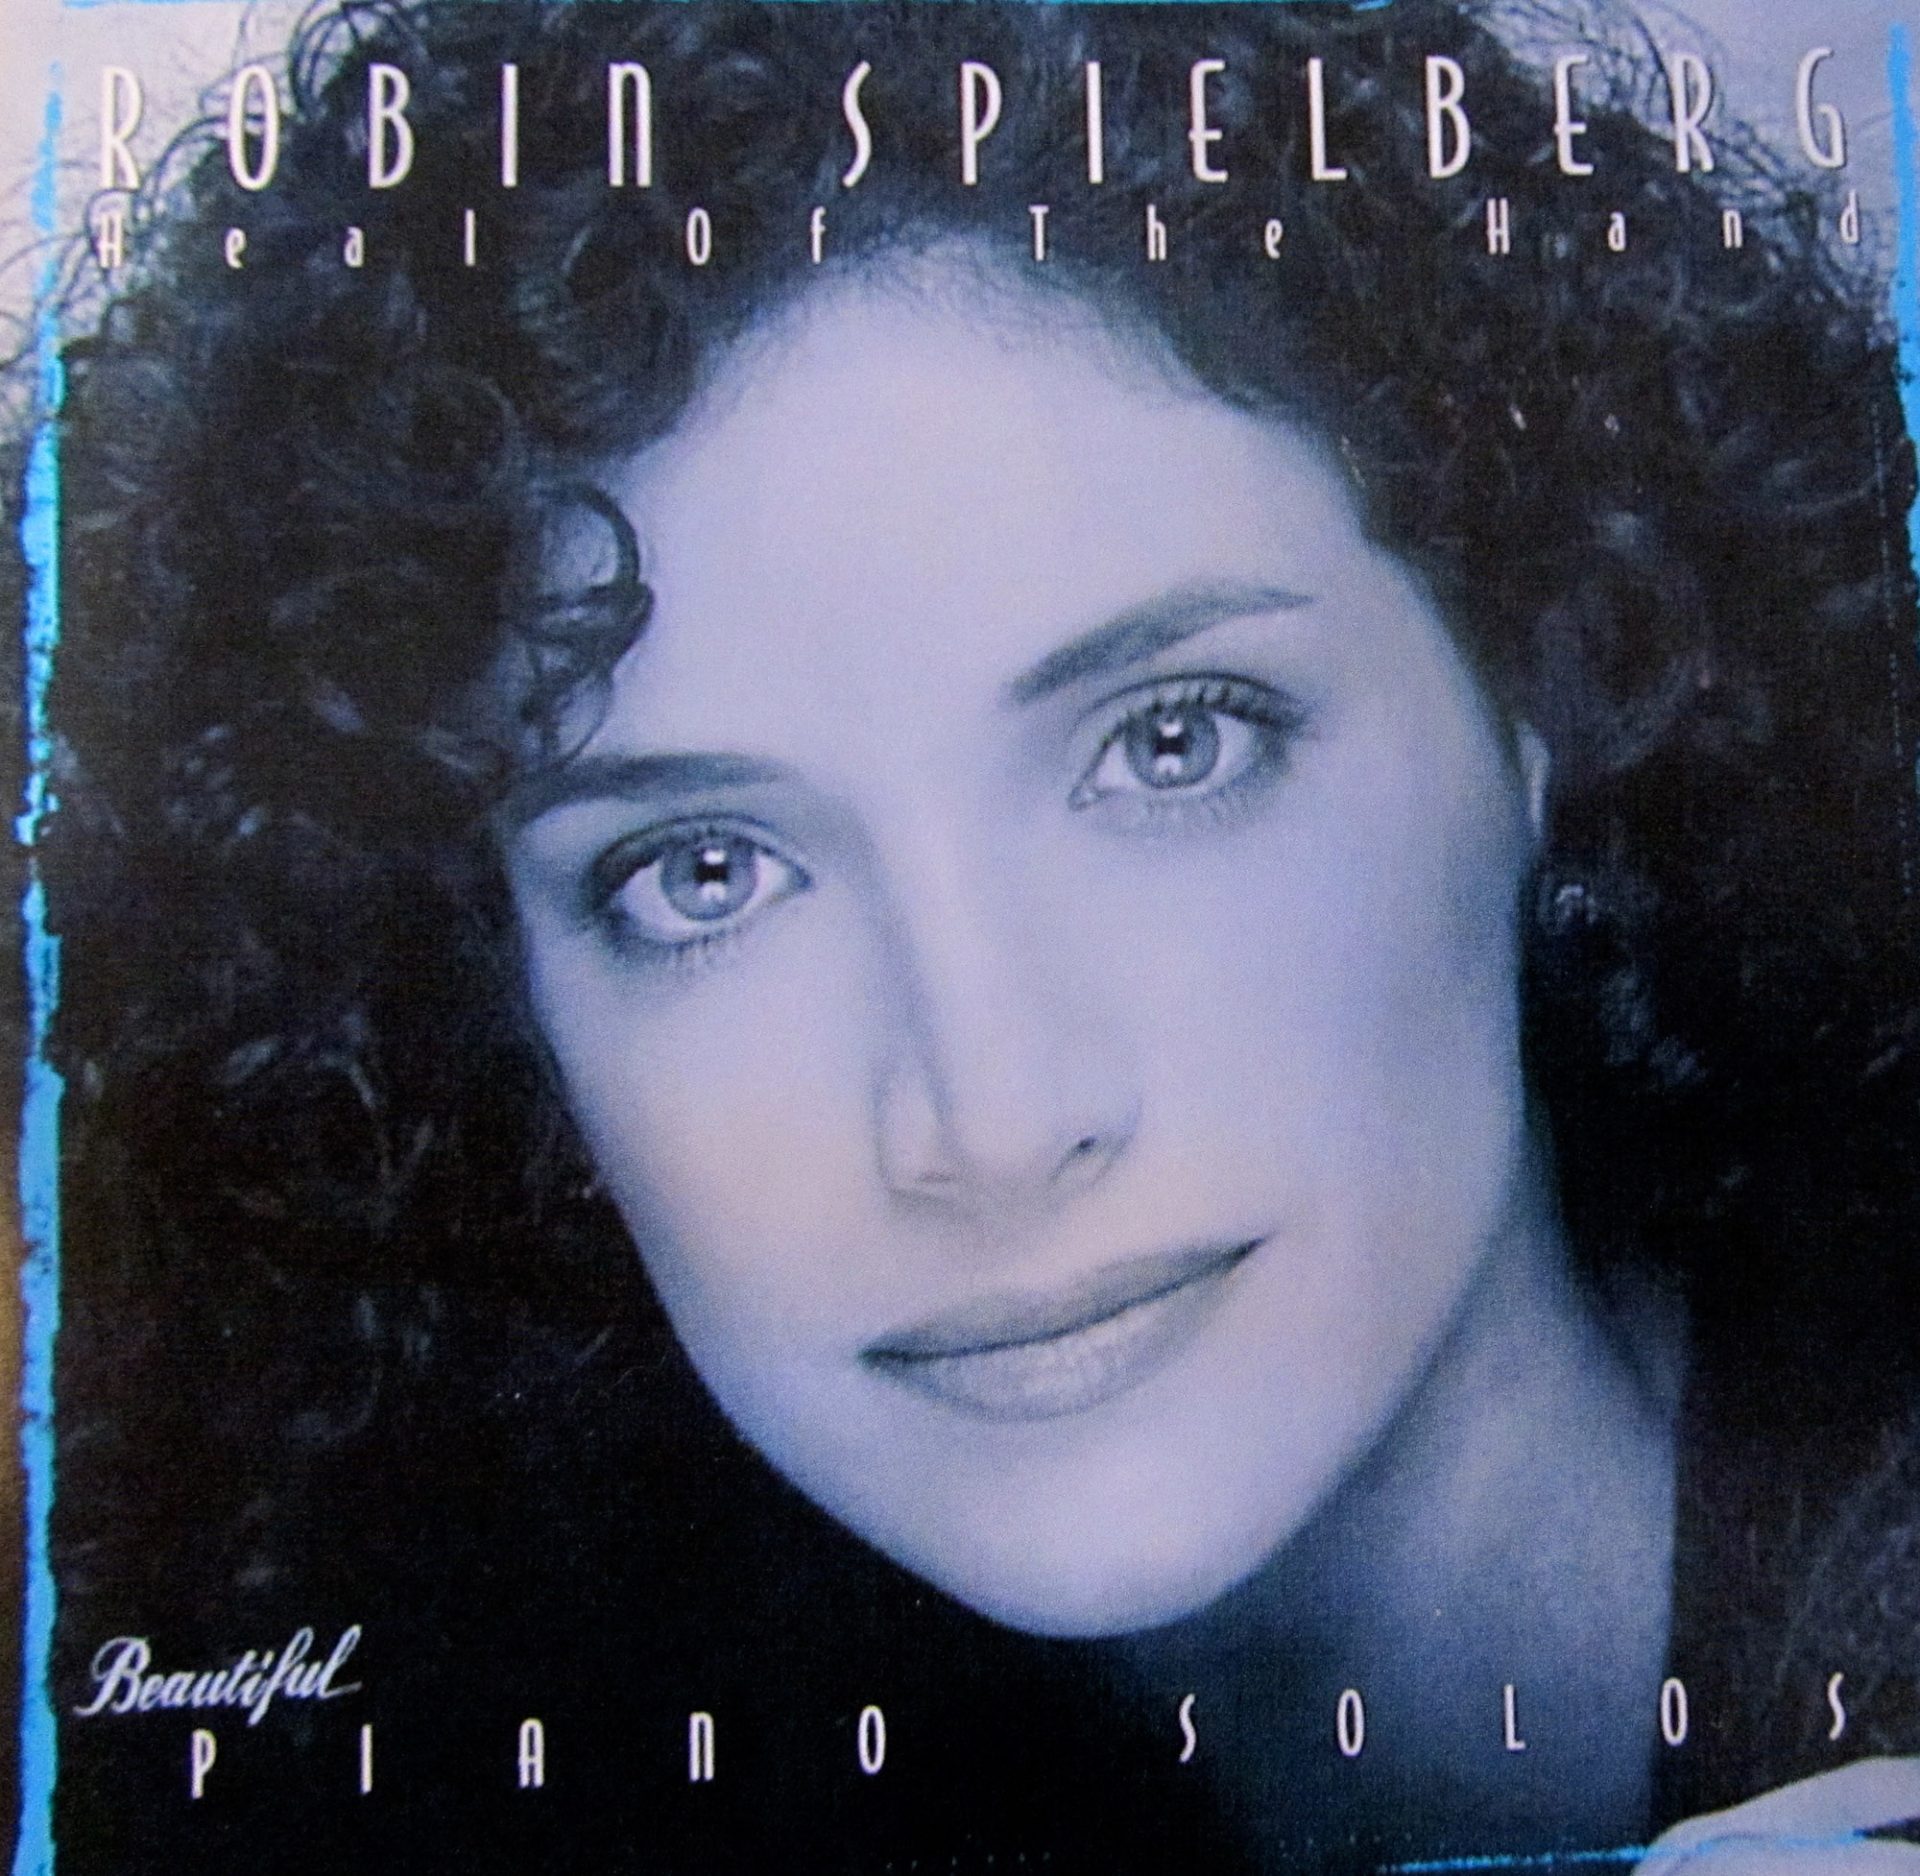 Album cover of Robin Spielberg's "Heal of the Hand"